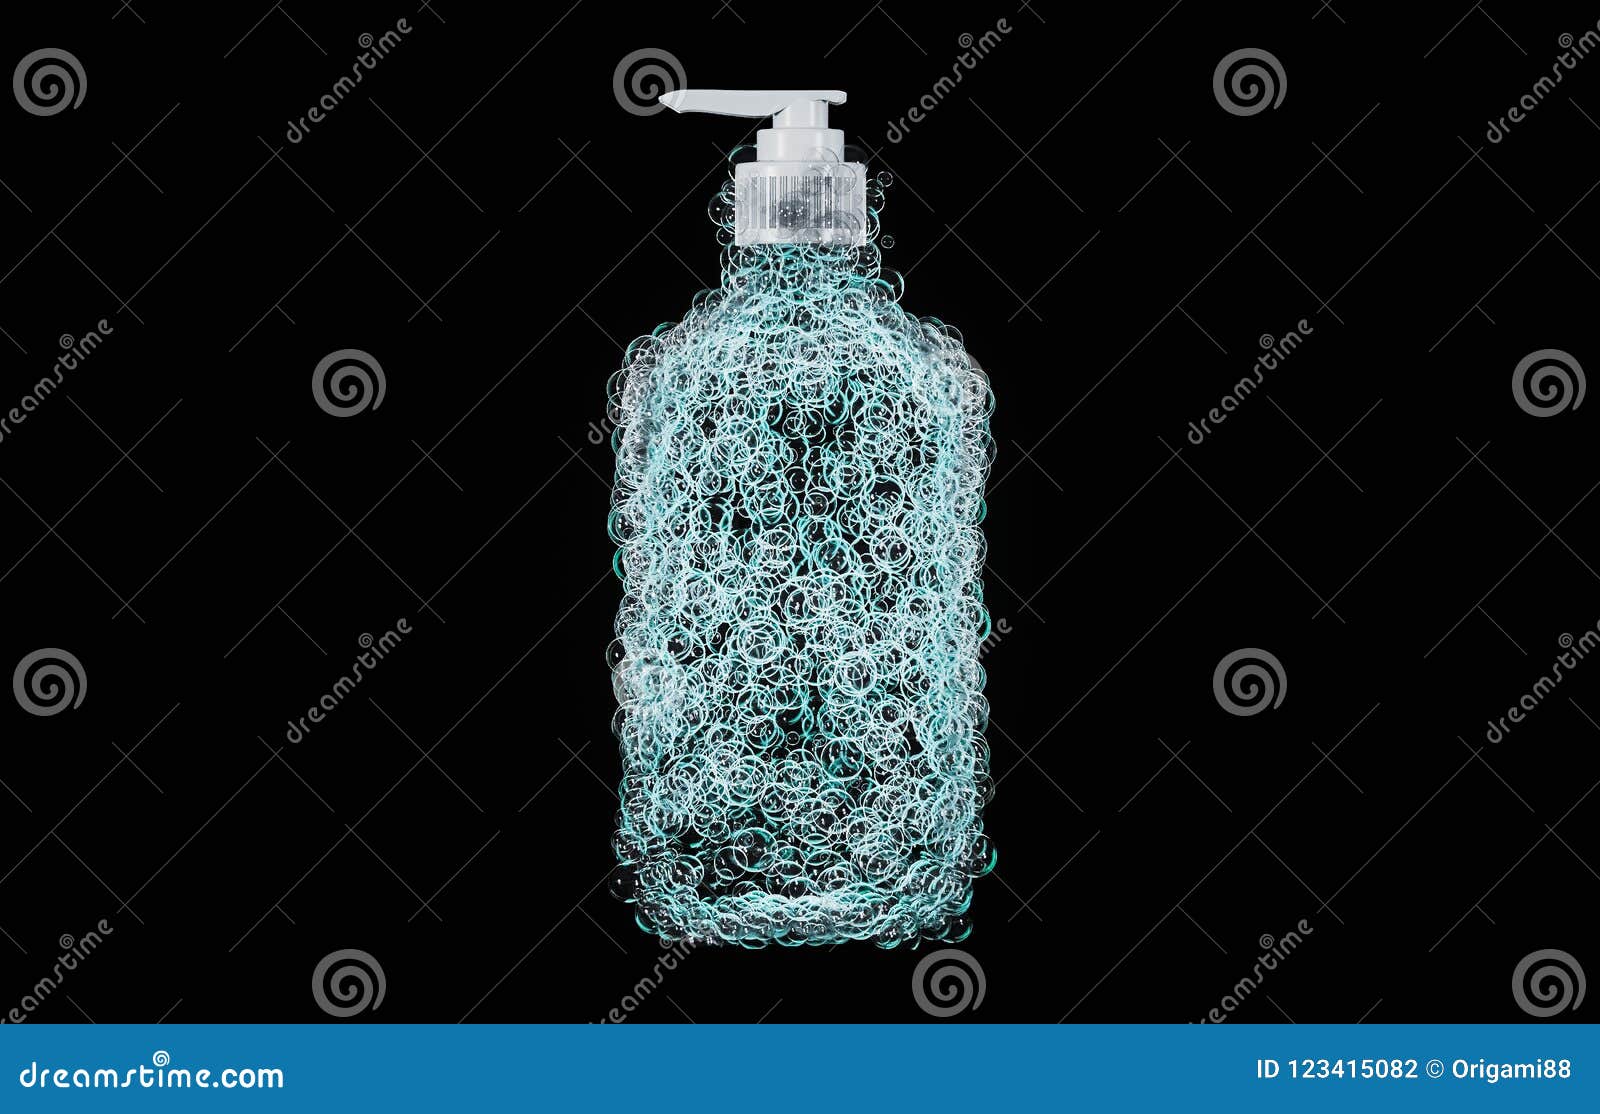 Hand Wash Dispenser Bottle Mockup Made From Soap Bubbles Isolated